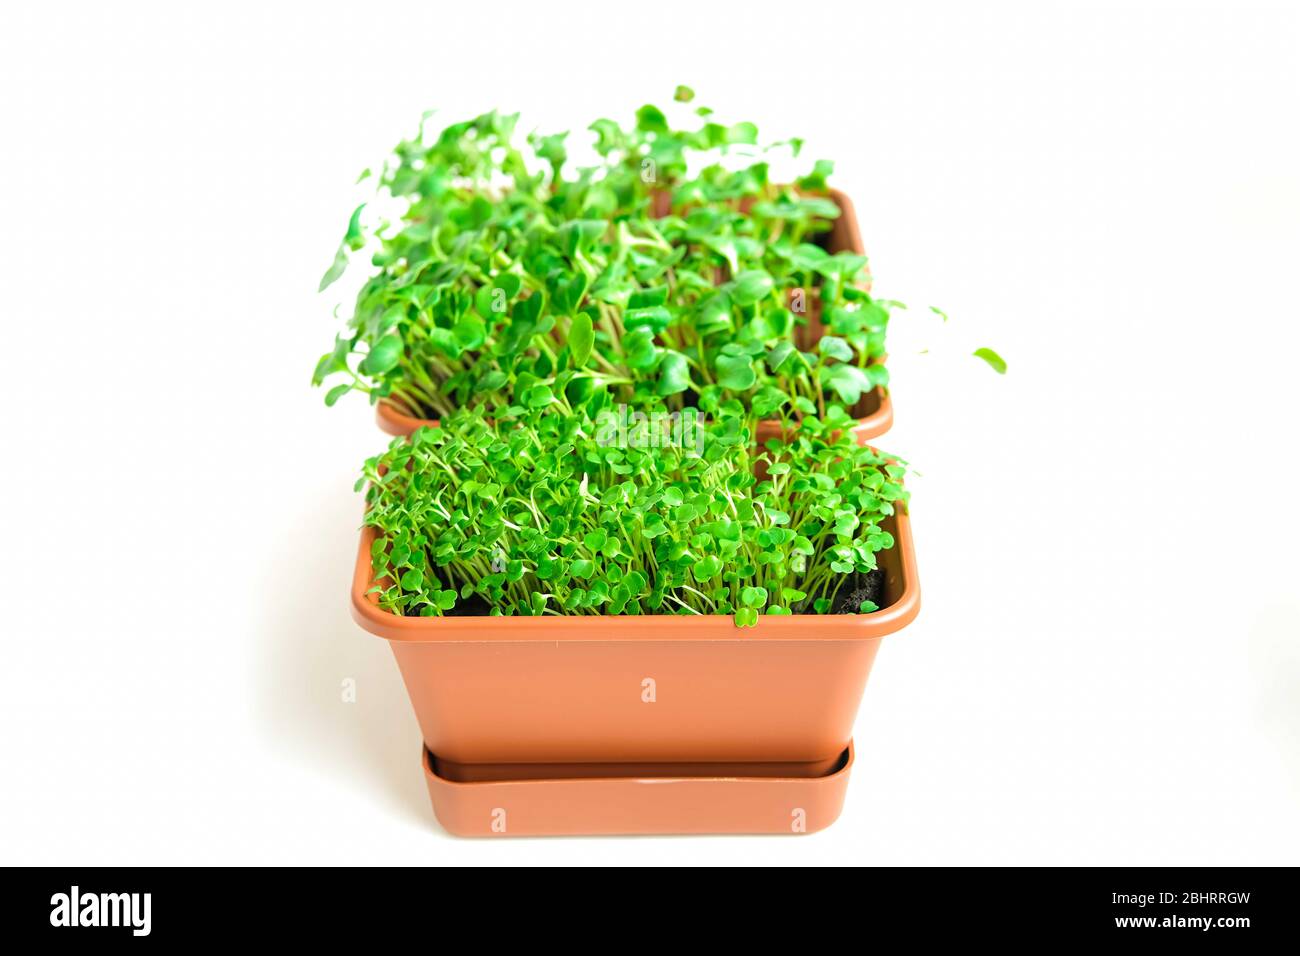 Red radish microgreens in a bowl. Young plants, seedlings and sprouts. Macro food photo, green shoots, healthy eating, vegans, close up from above over white. Biophilic concept. Windowsill garden. Stock Photo